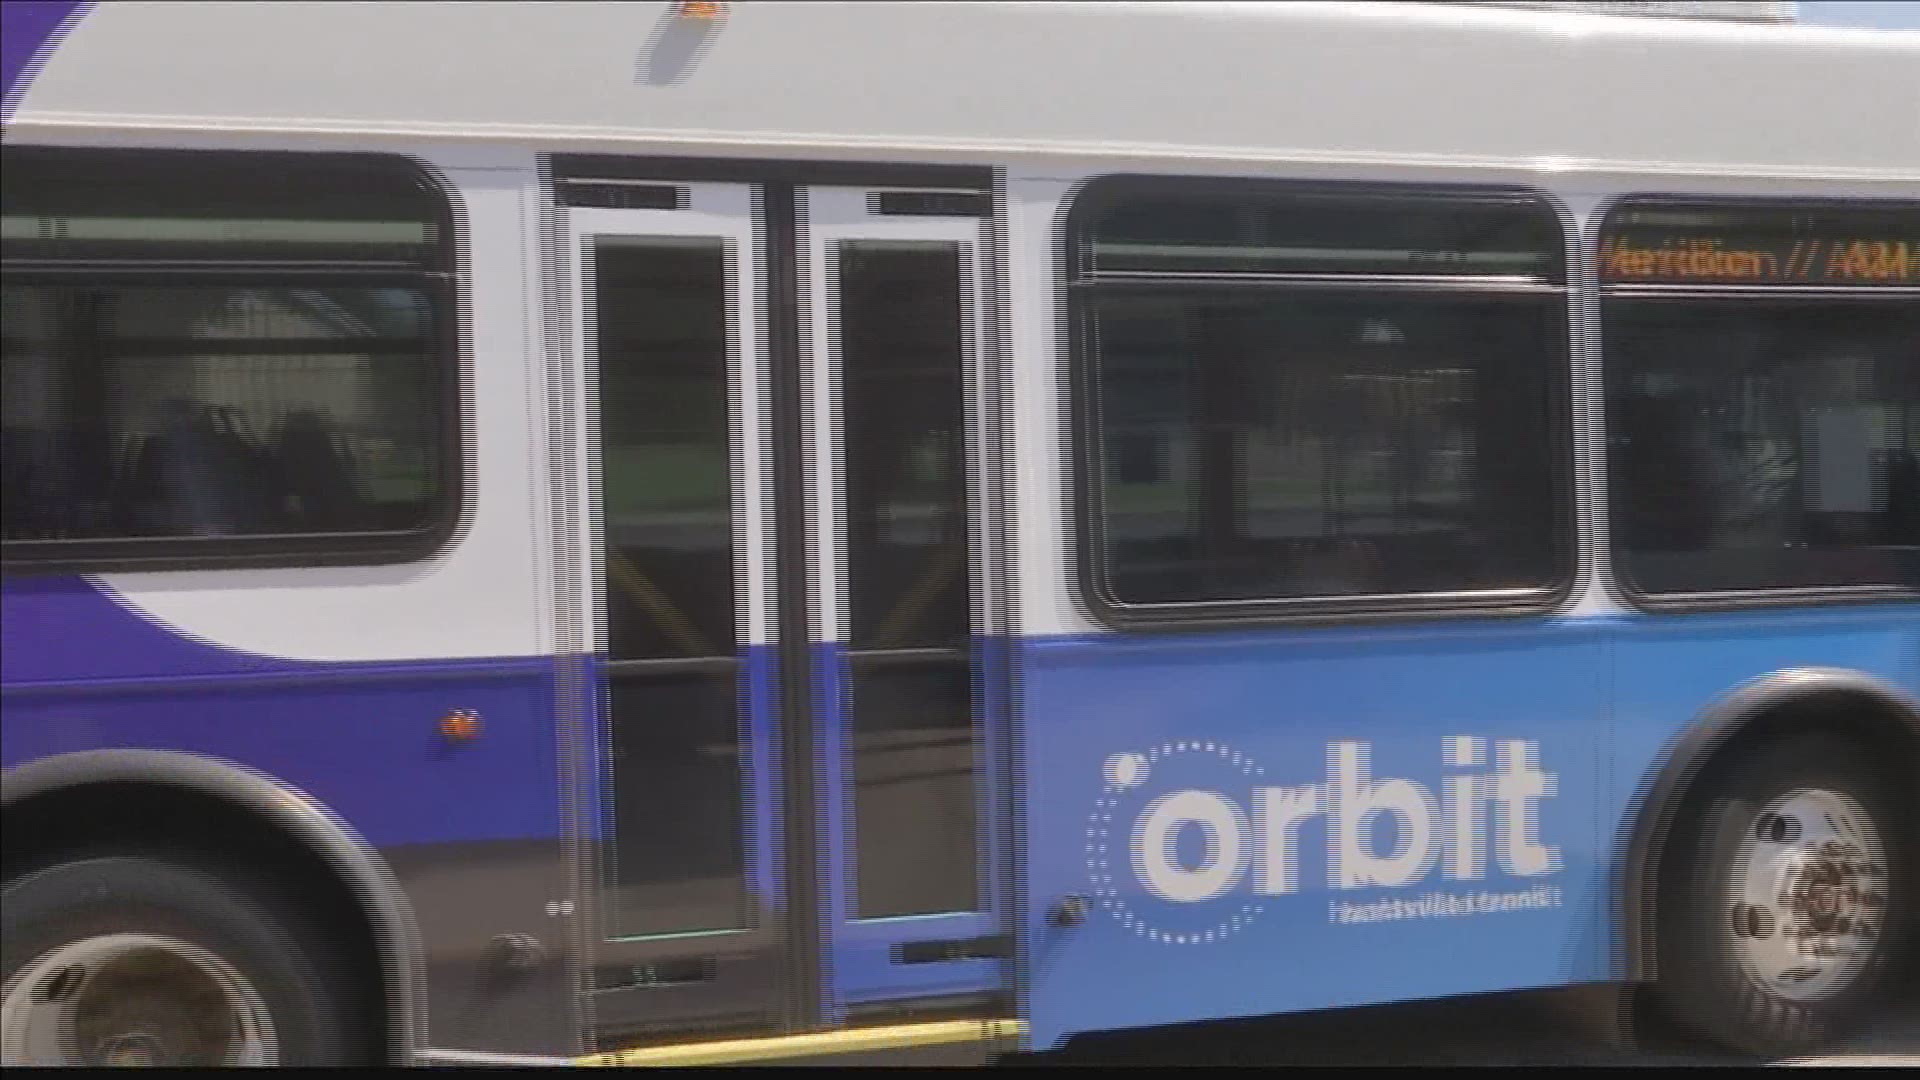 The Shuttle is now called "Orbit" and Handiride has been changed to "Access."